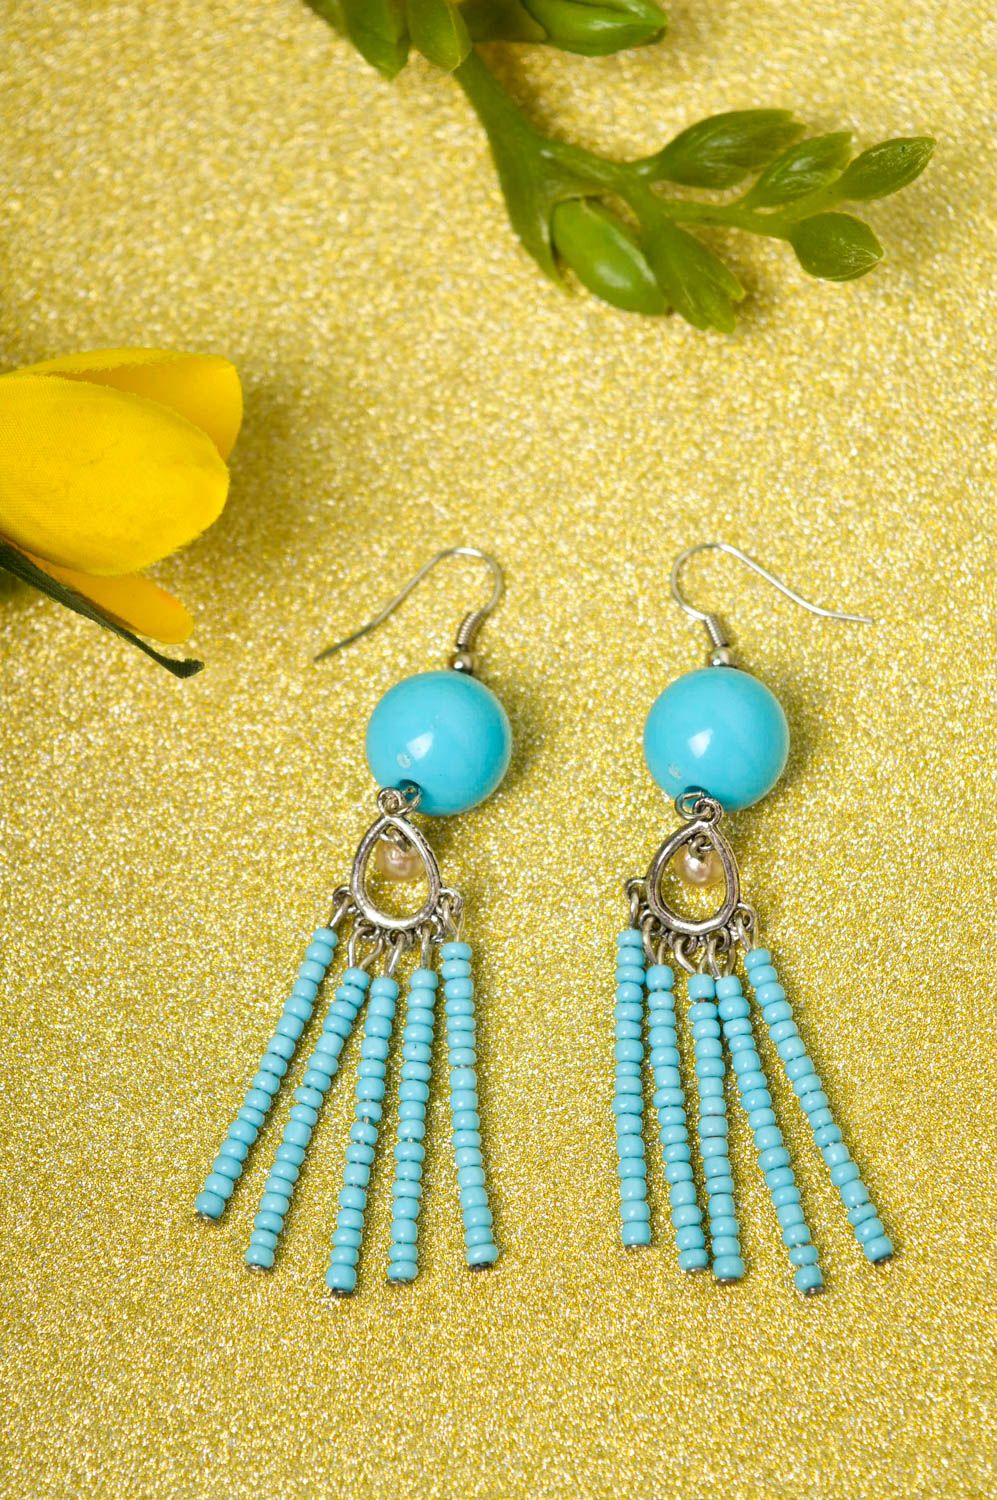 Handmade earrings long earrings with charms designer jewelry gift ideas photo 1